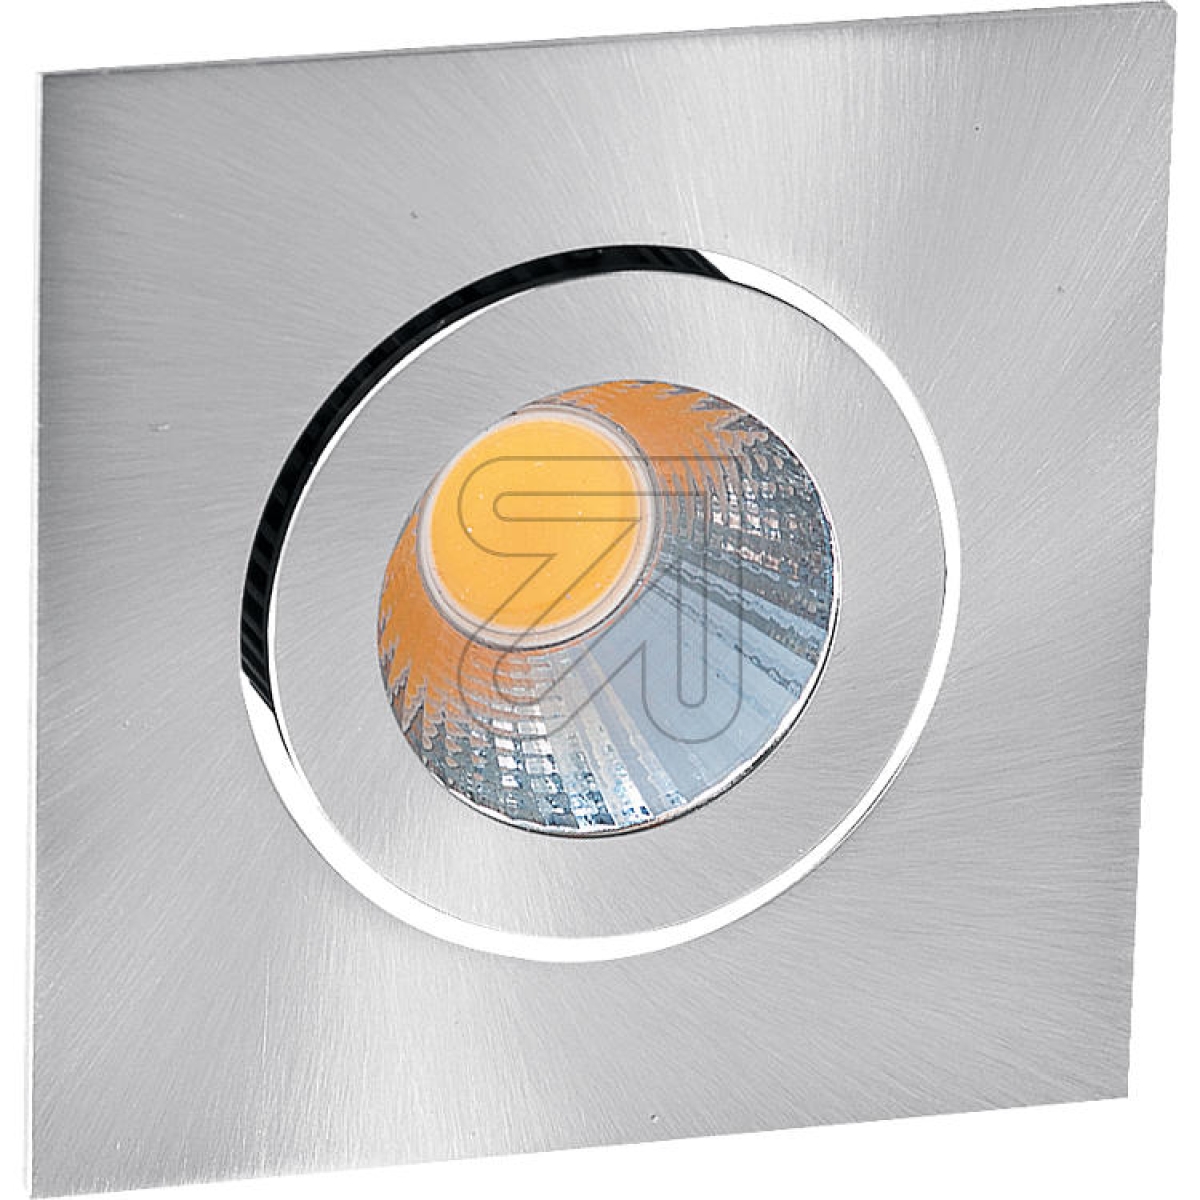 EVNPower LED recessed light stainless steel 3000K 8.4W PC24N91302Article-No: 624120